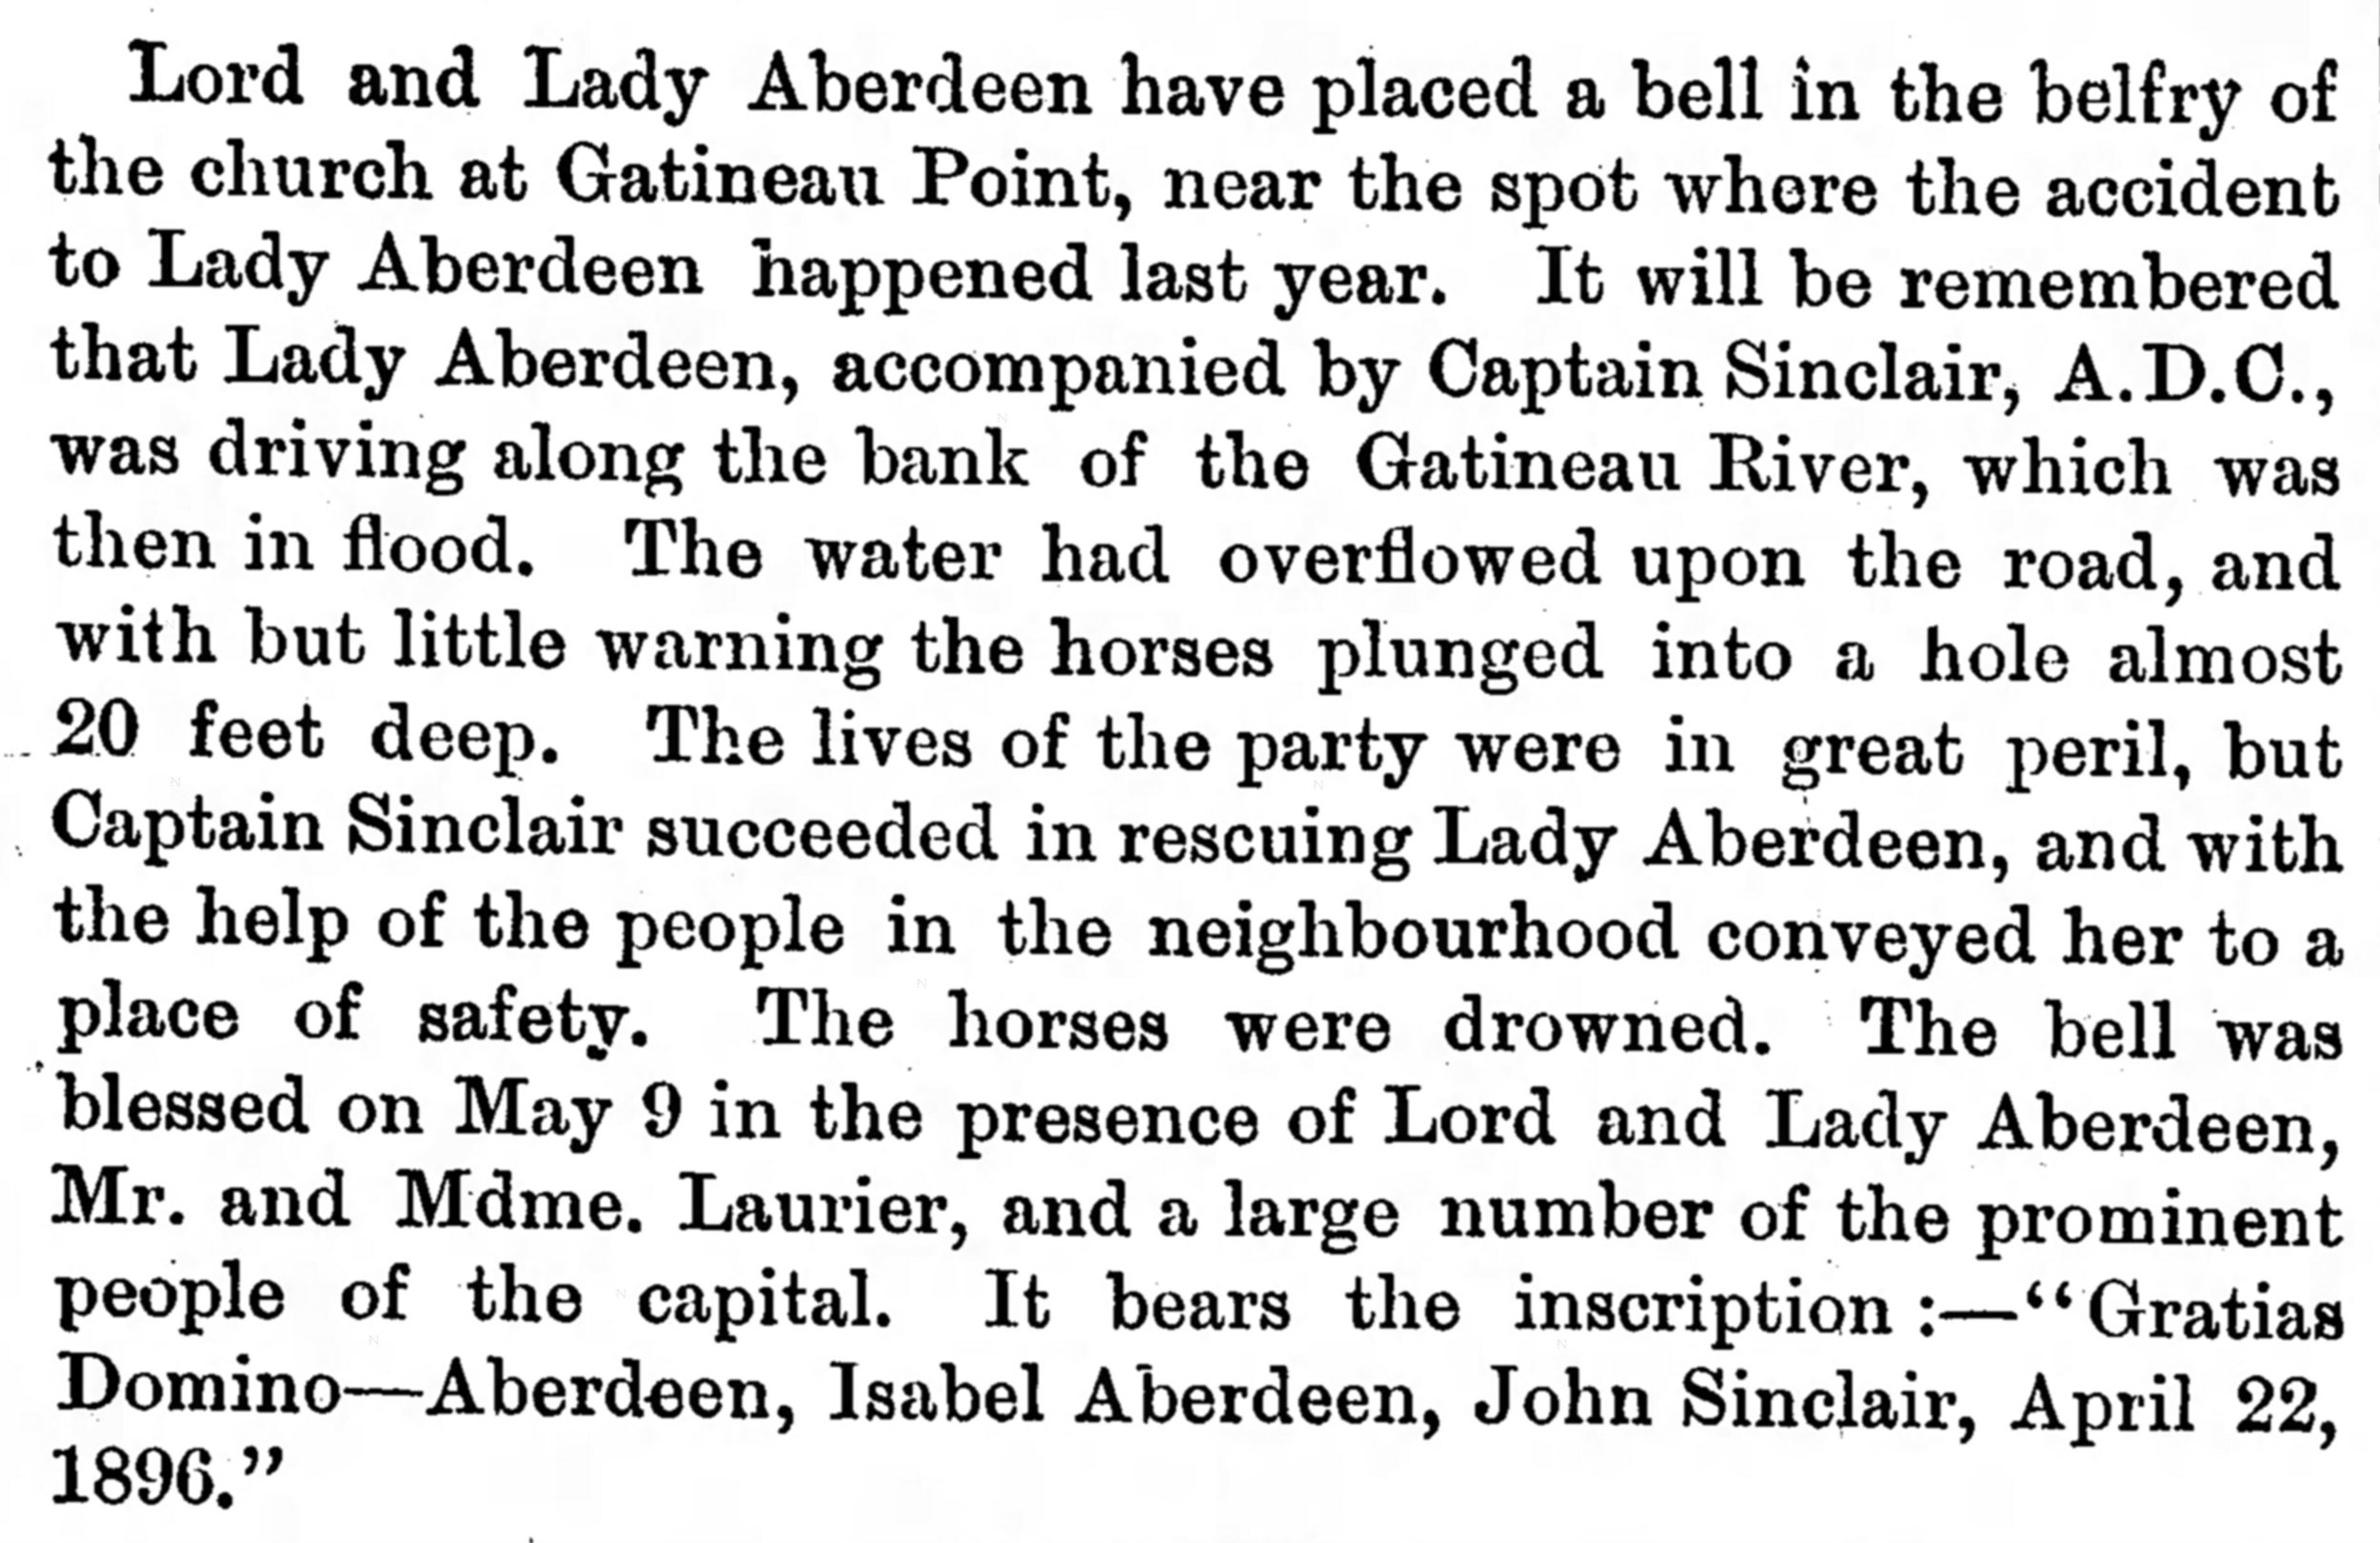 1897 Article about Lady Aberdeen's Bell in The Colonies and India Newspaper